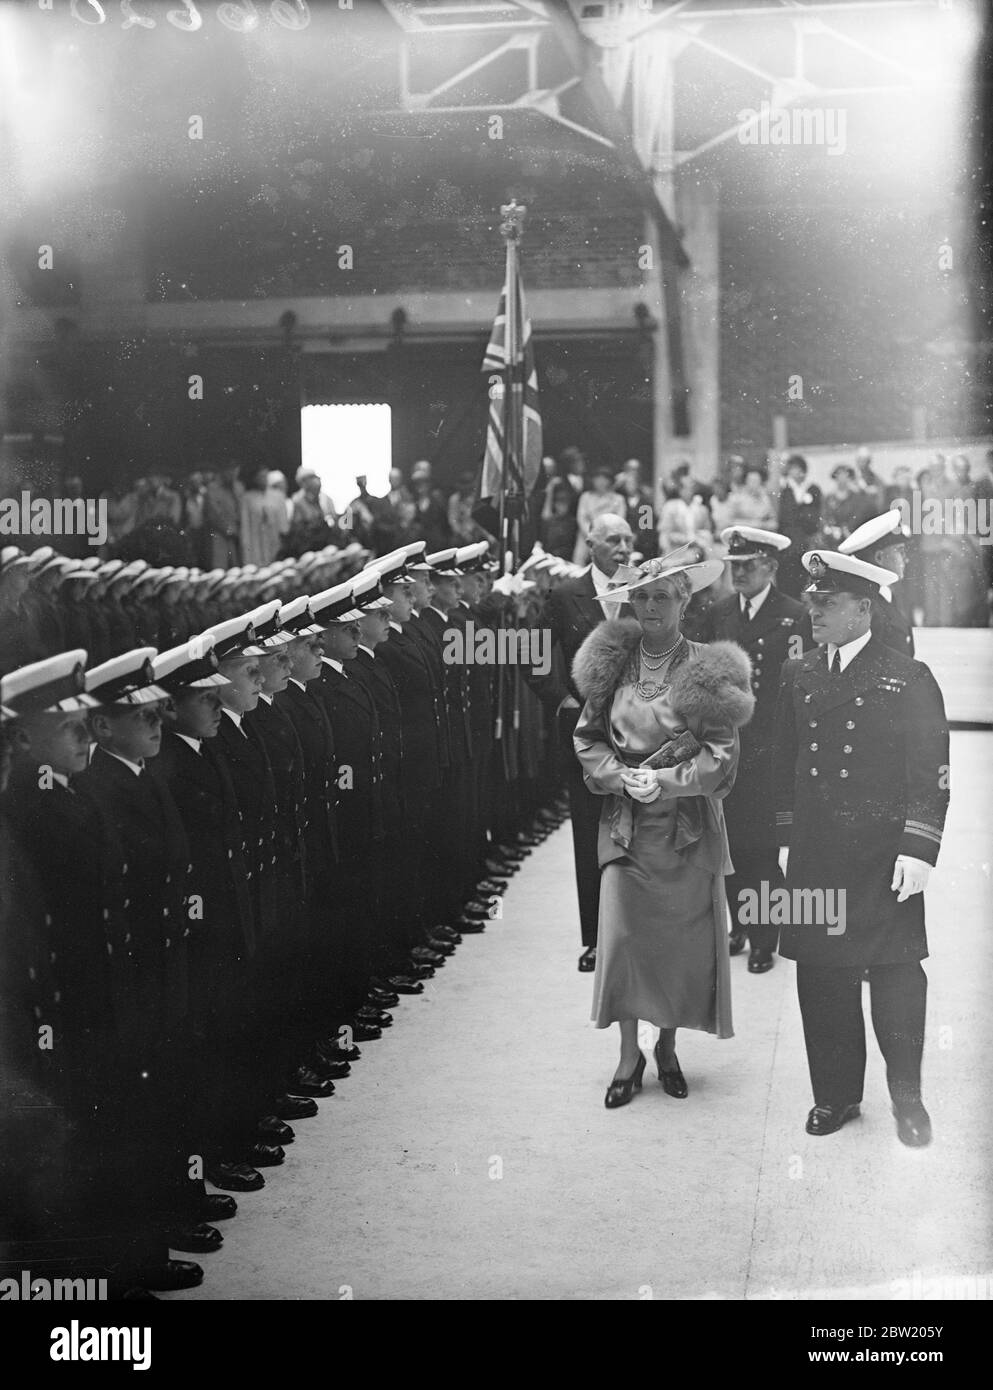 Britain's first Merchant Navy Week was opened at Southampton by Princess Alice Countess of Athlone, who signalled full speed ahead on a ship's telegraph. She inspected a guard of honour at the opening ceremony. 17 July 1937 Stock Photo